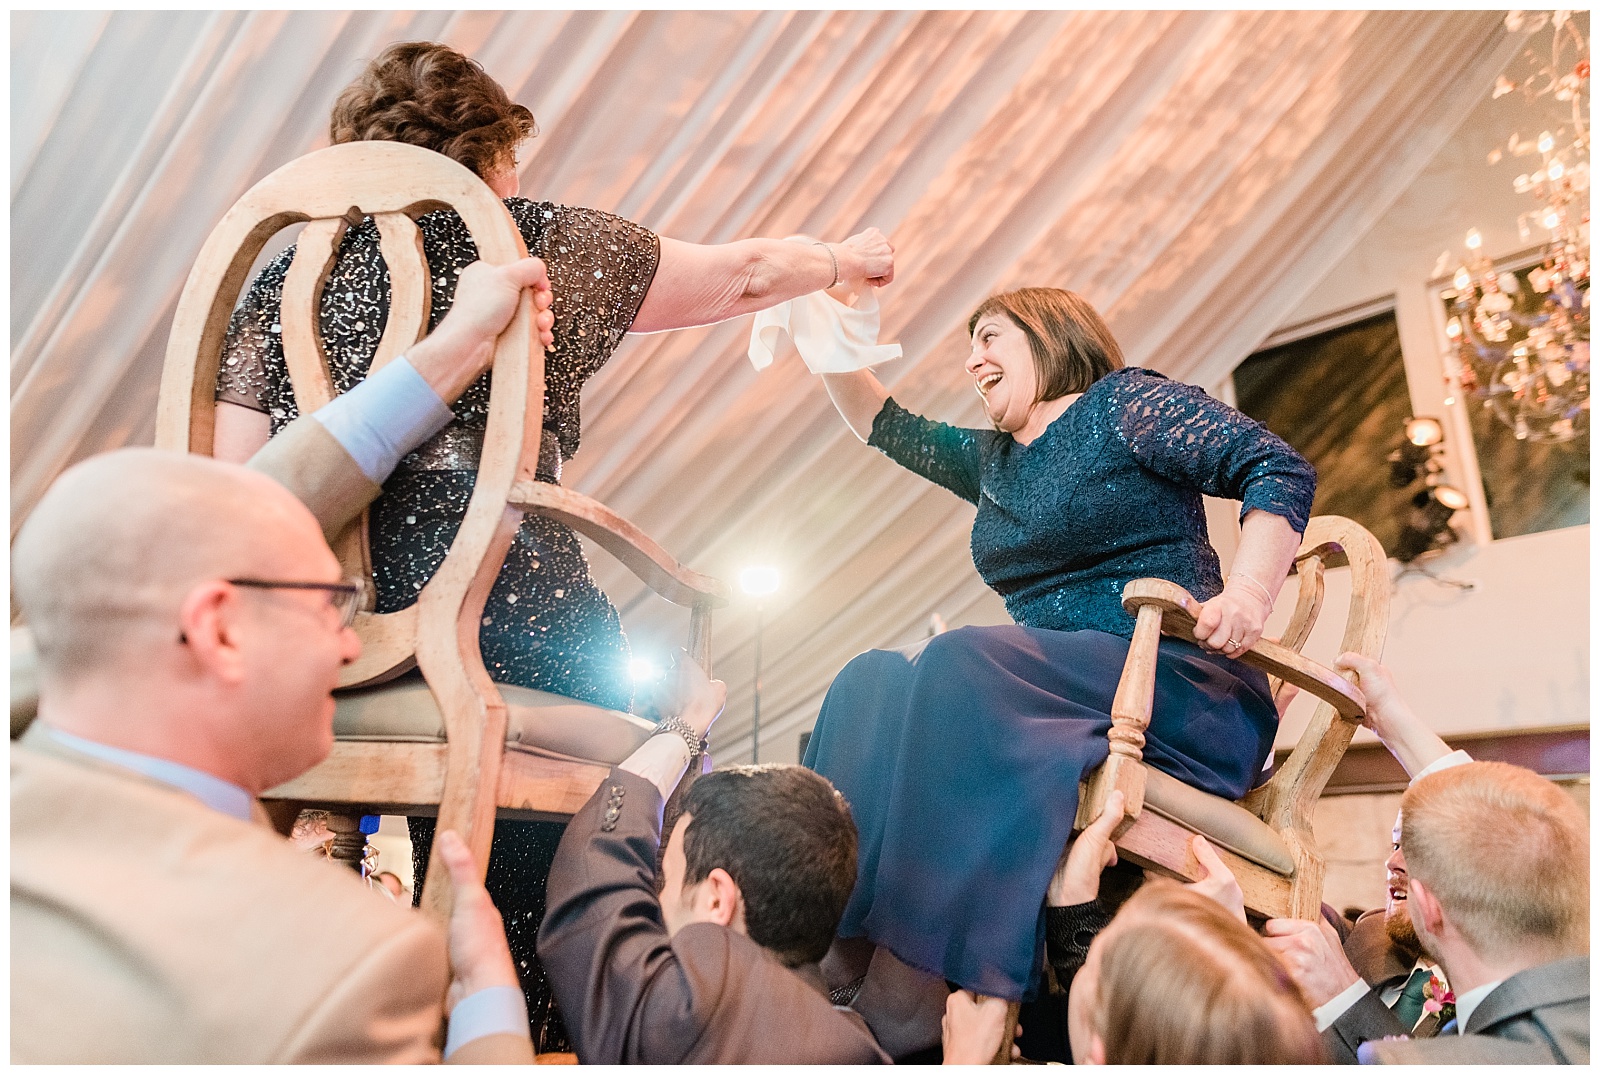 Both mothers are lifted up on chairs for the Jewish hora dance.